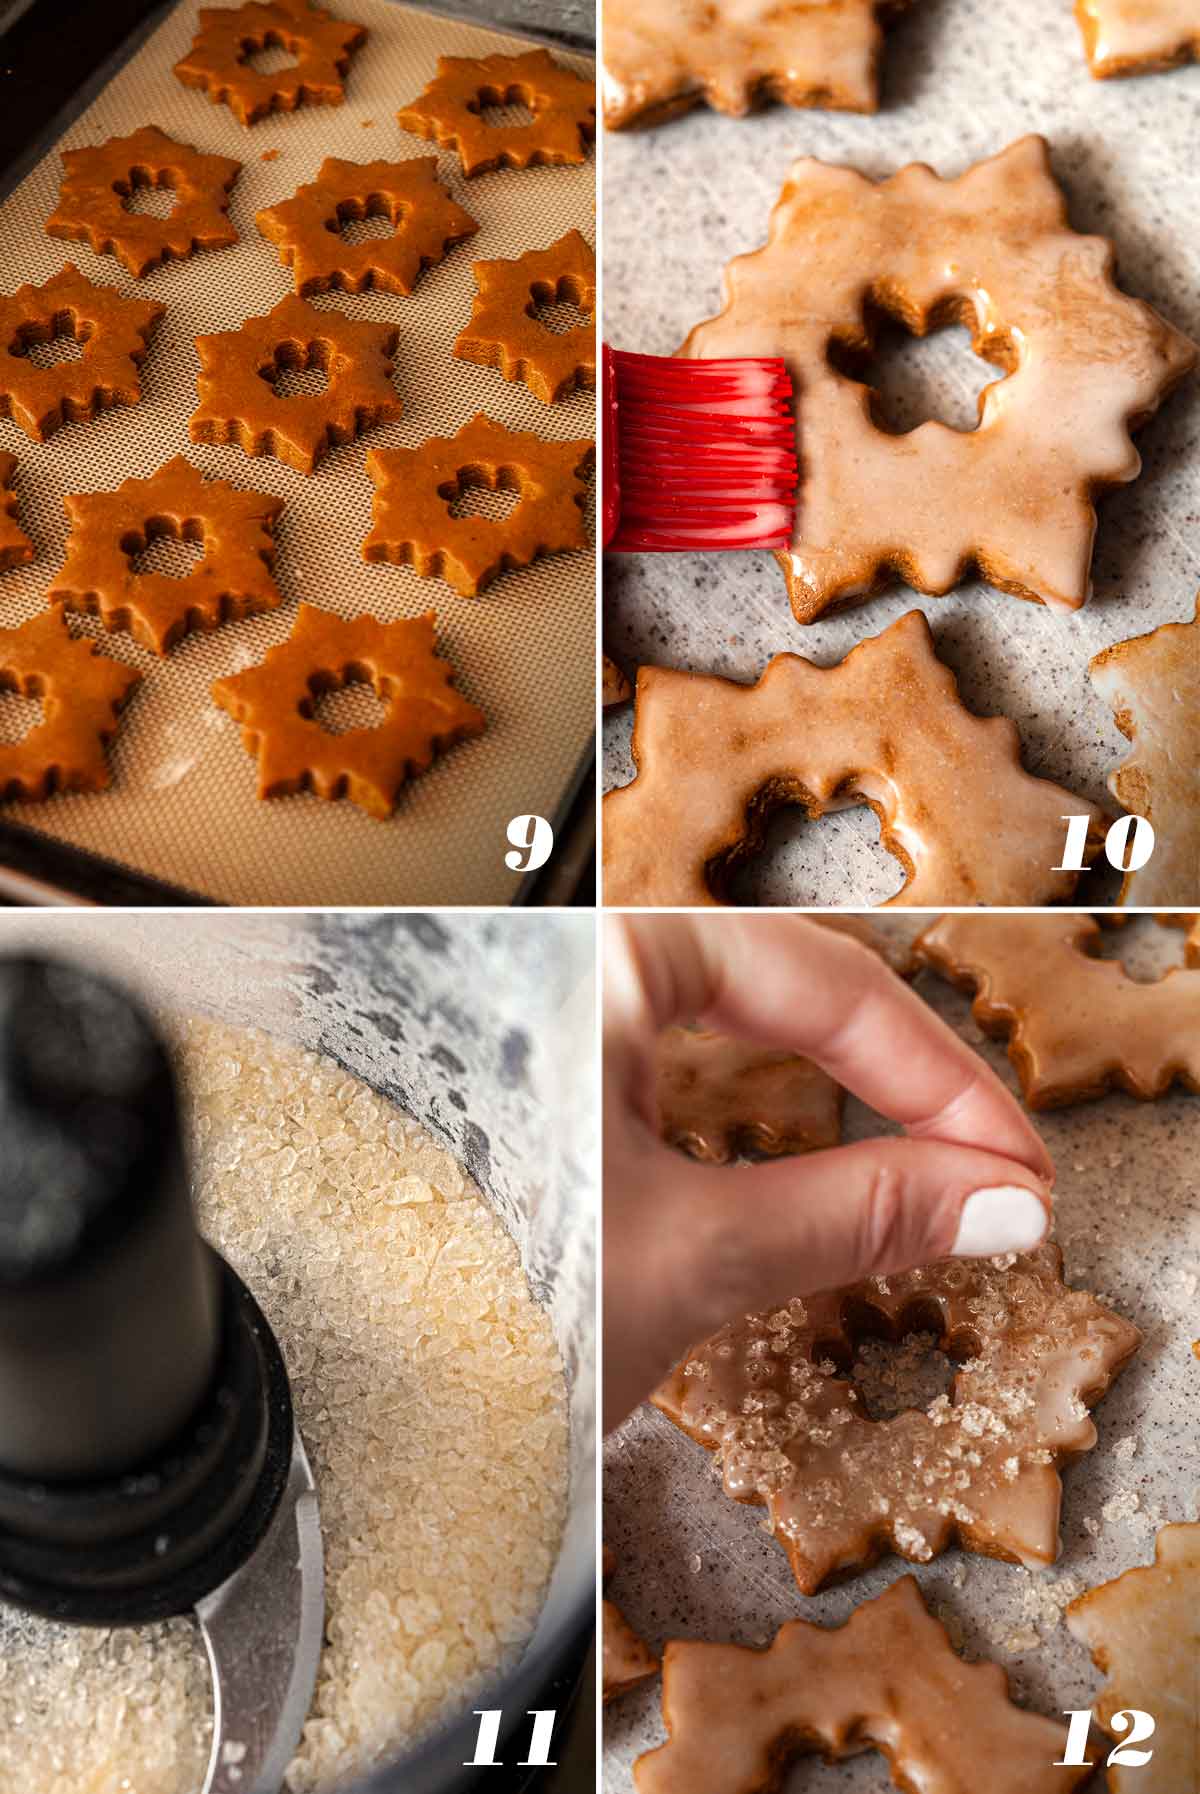 A collage of 4 numbered images showing how to glaze and sugar cookies.